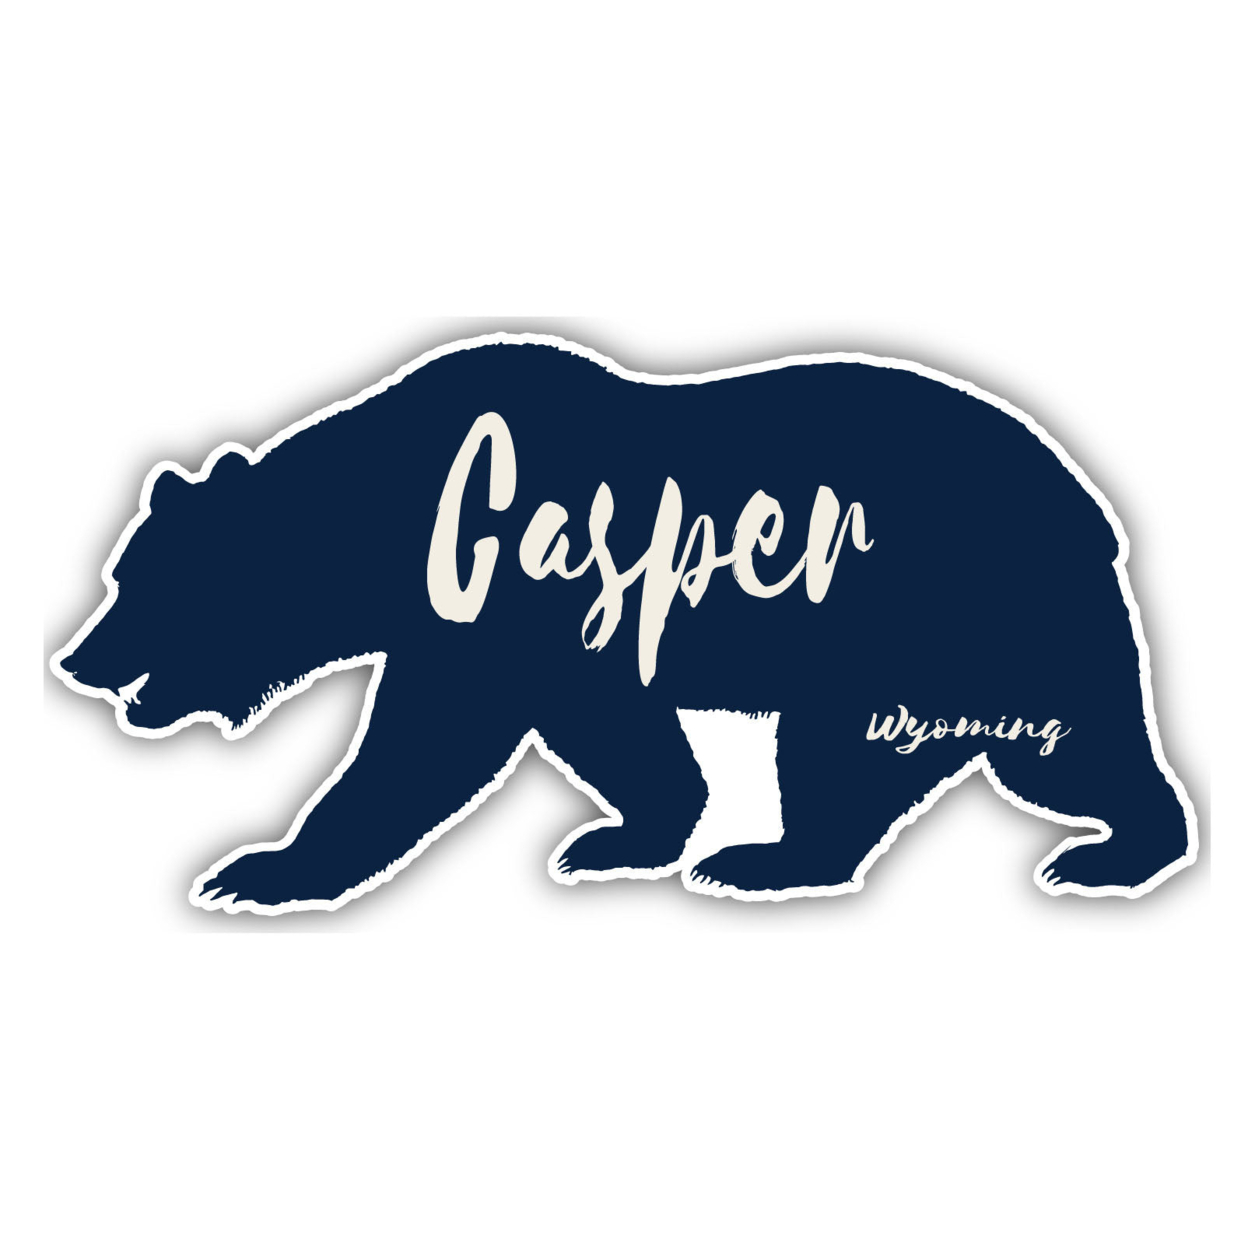 Casper Wyoming Souvenir Decorative Stickers (Choose Theme And Size) - 4-Pack, 8-Inch, Camp Life